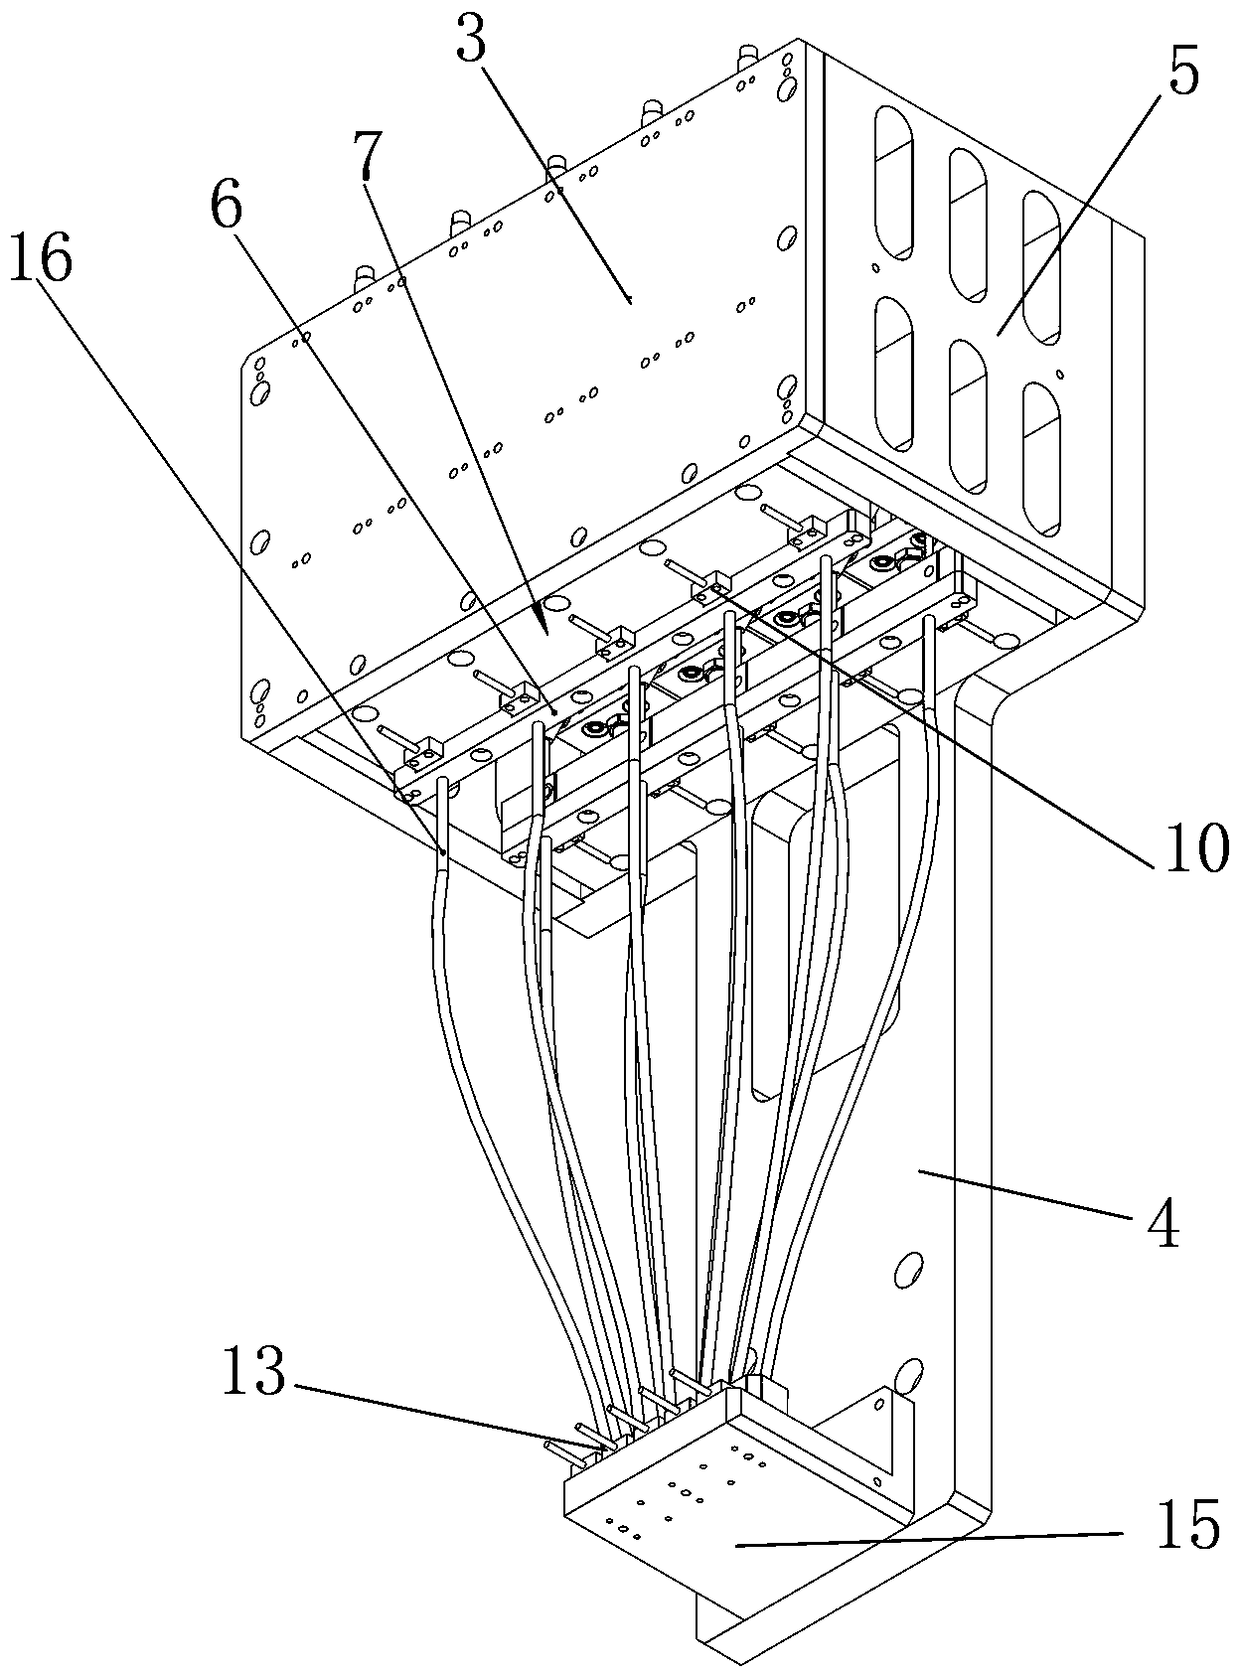 Pulse-type feeding mechanism for conveying porcelain columns